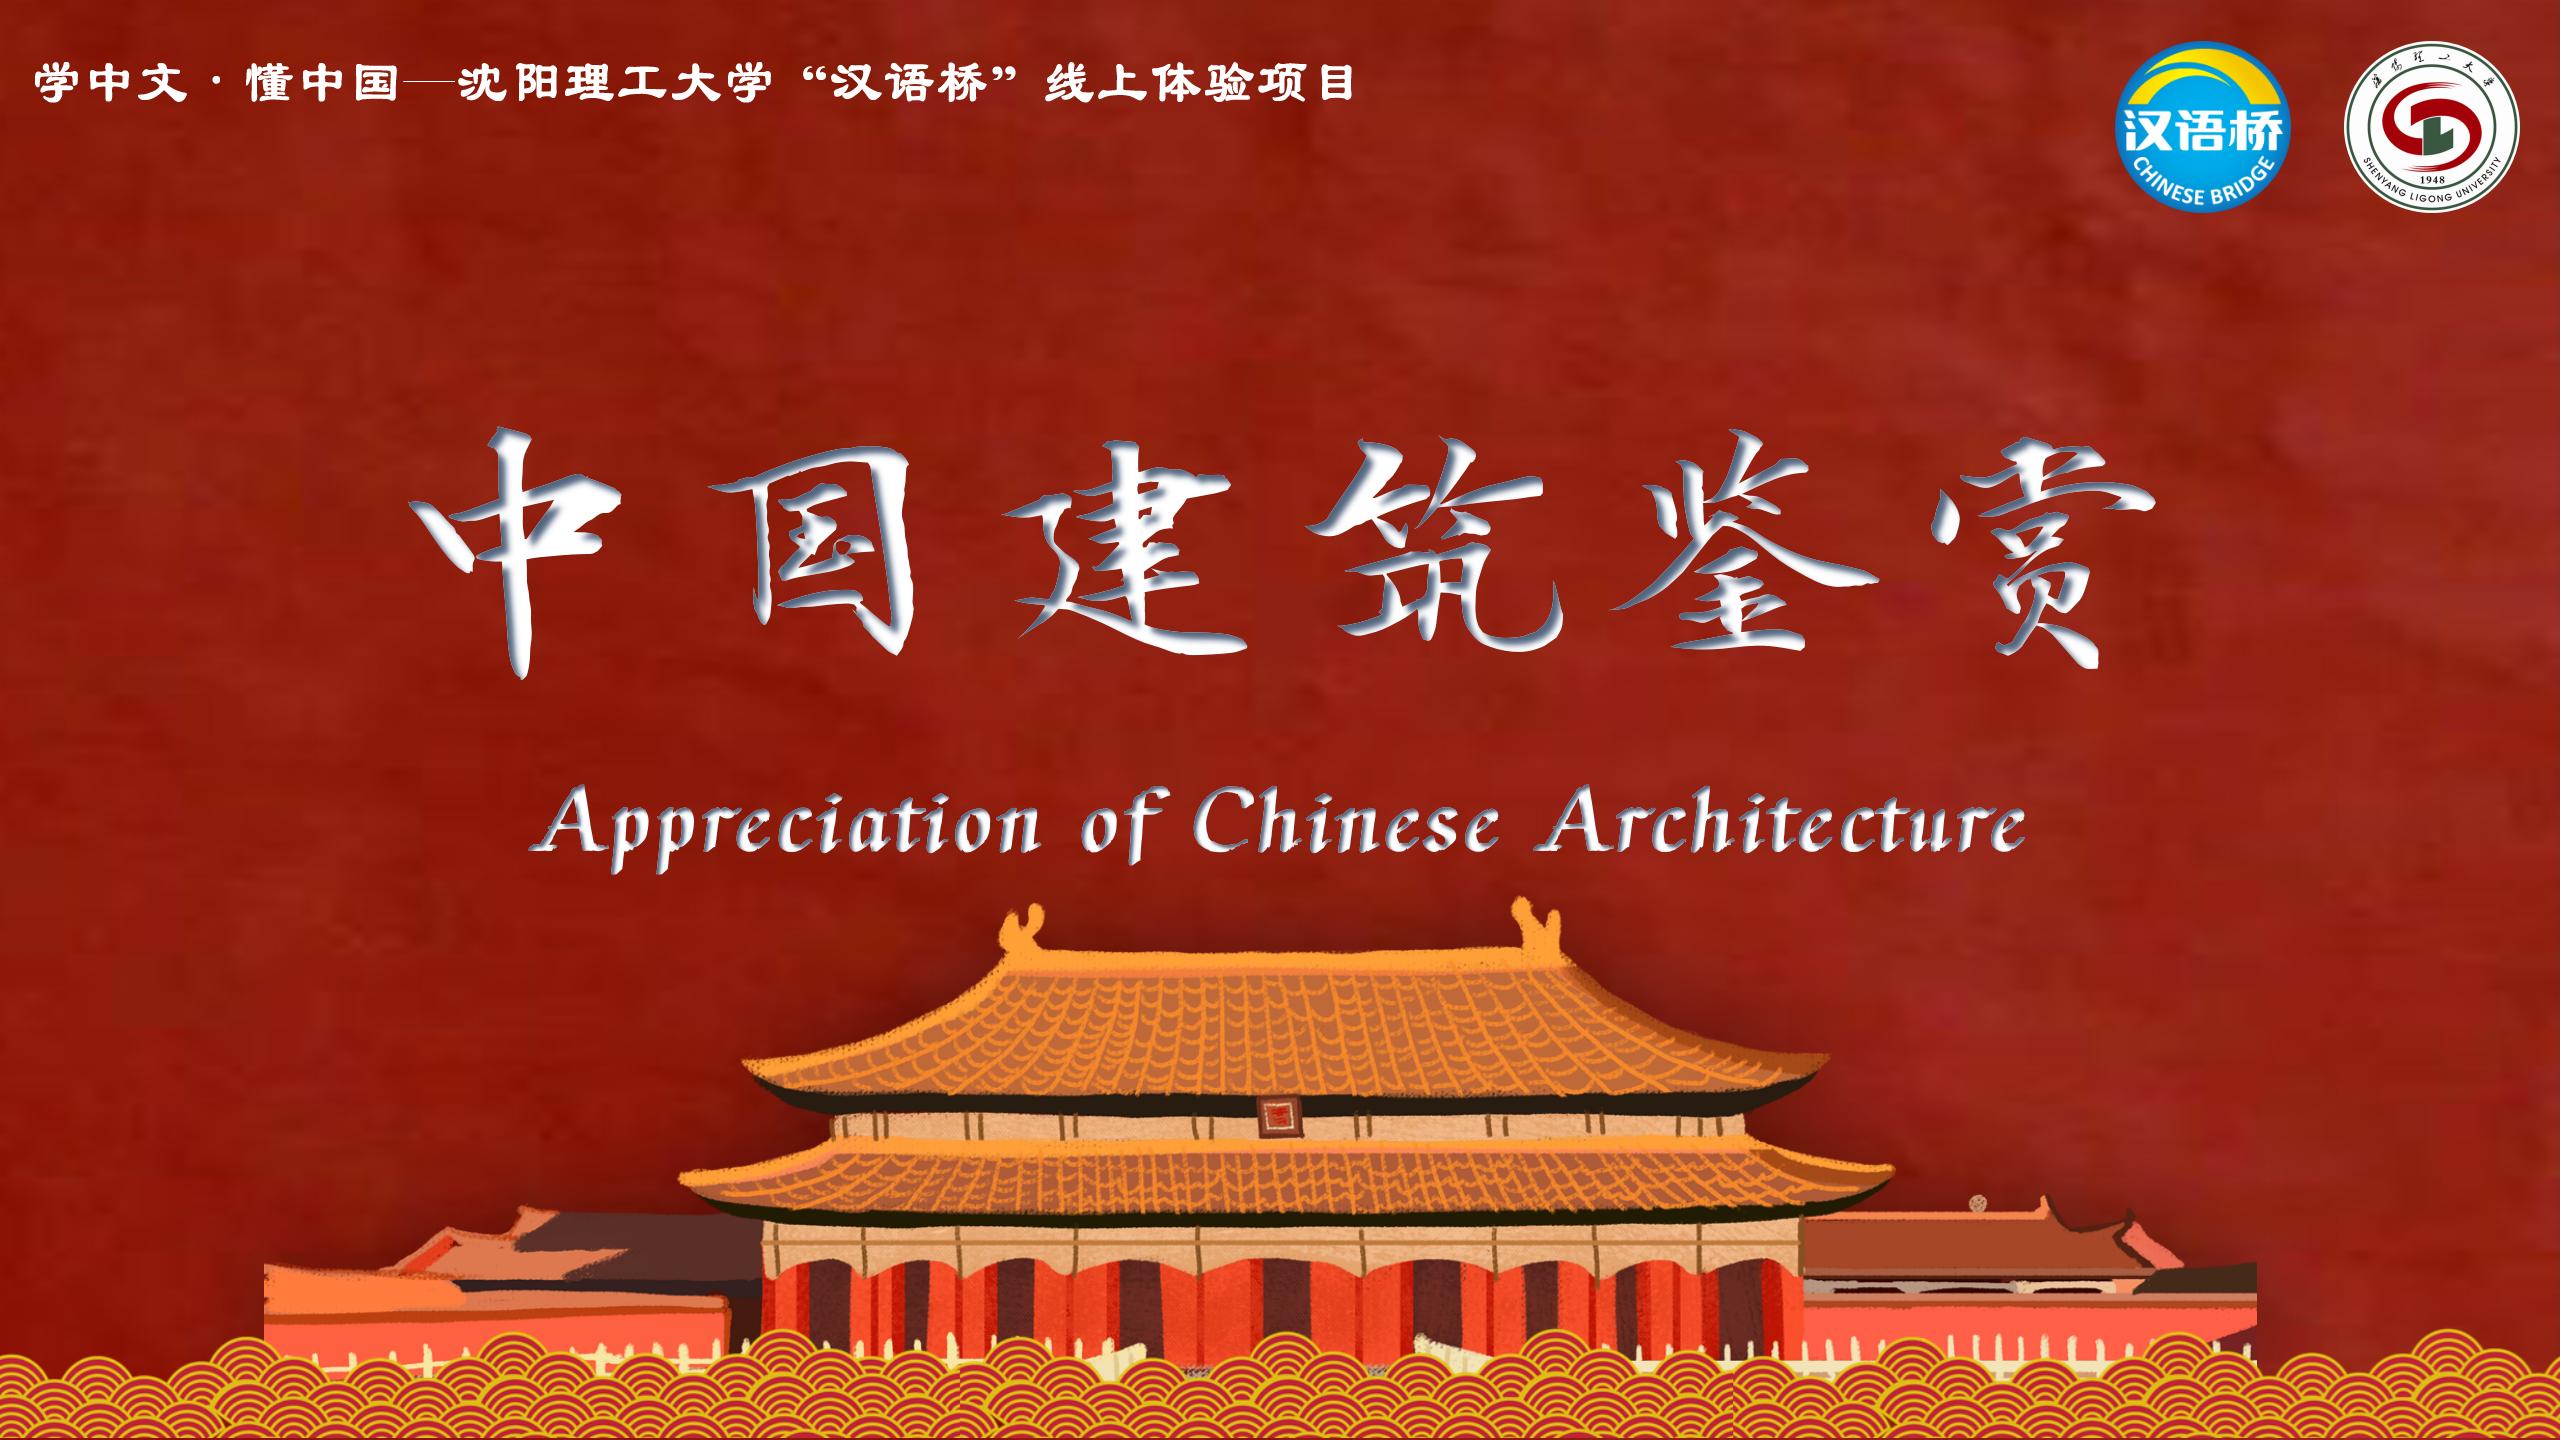 Appreciation of Chinese Architecture